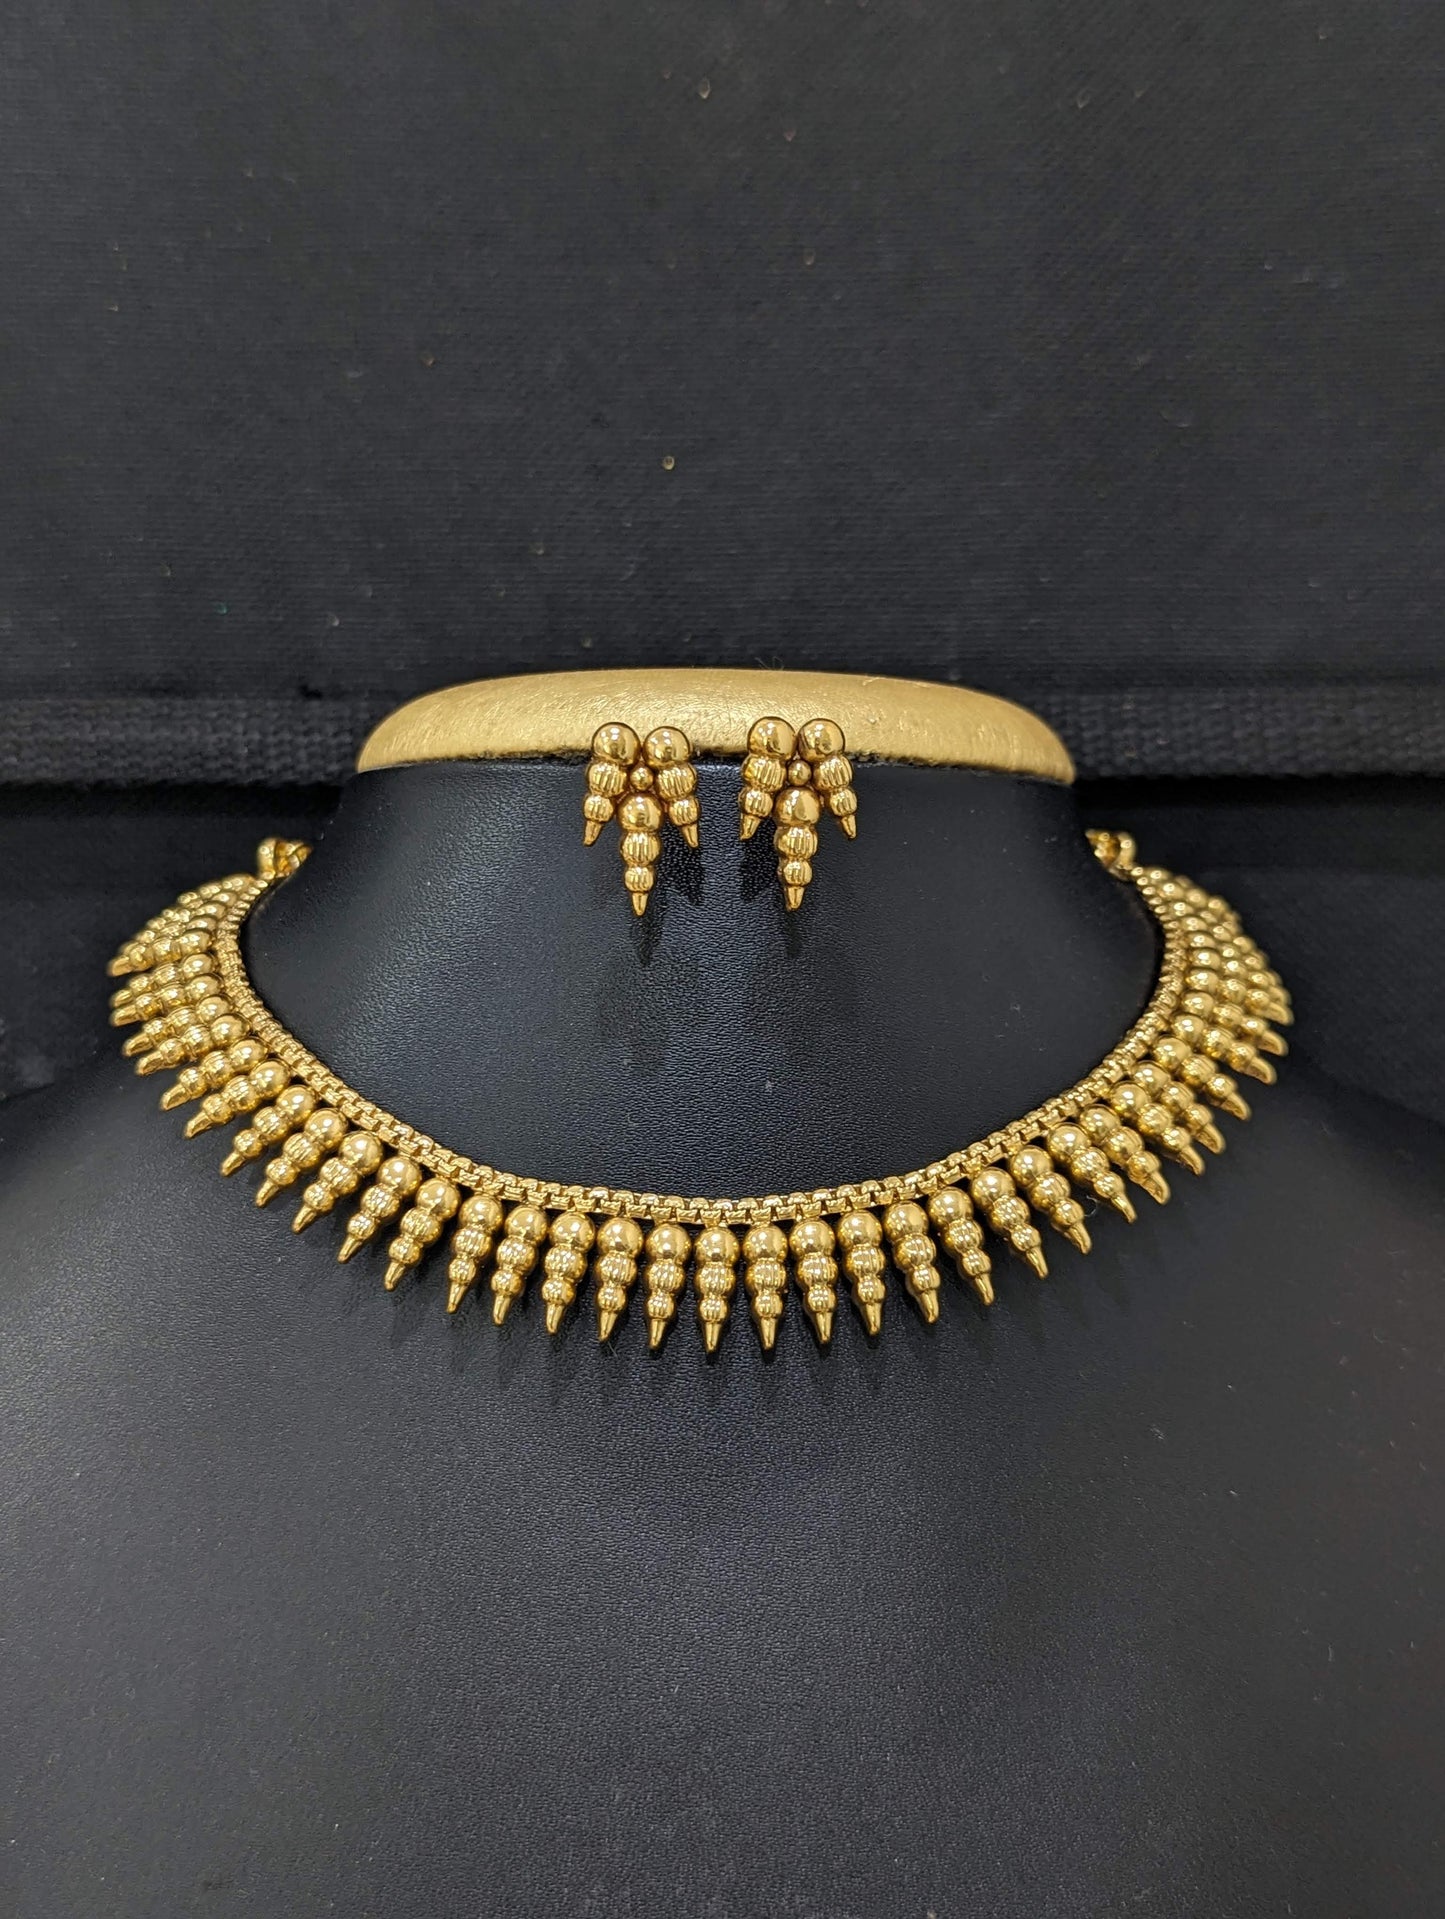 Spike design Choker necklace and Stud Earrings set